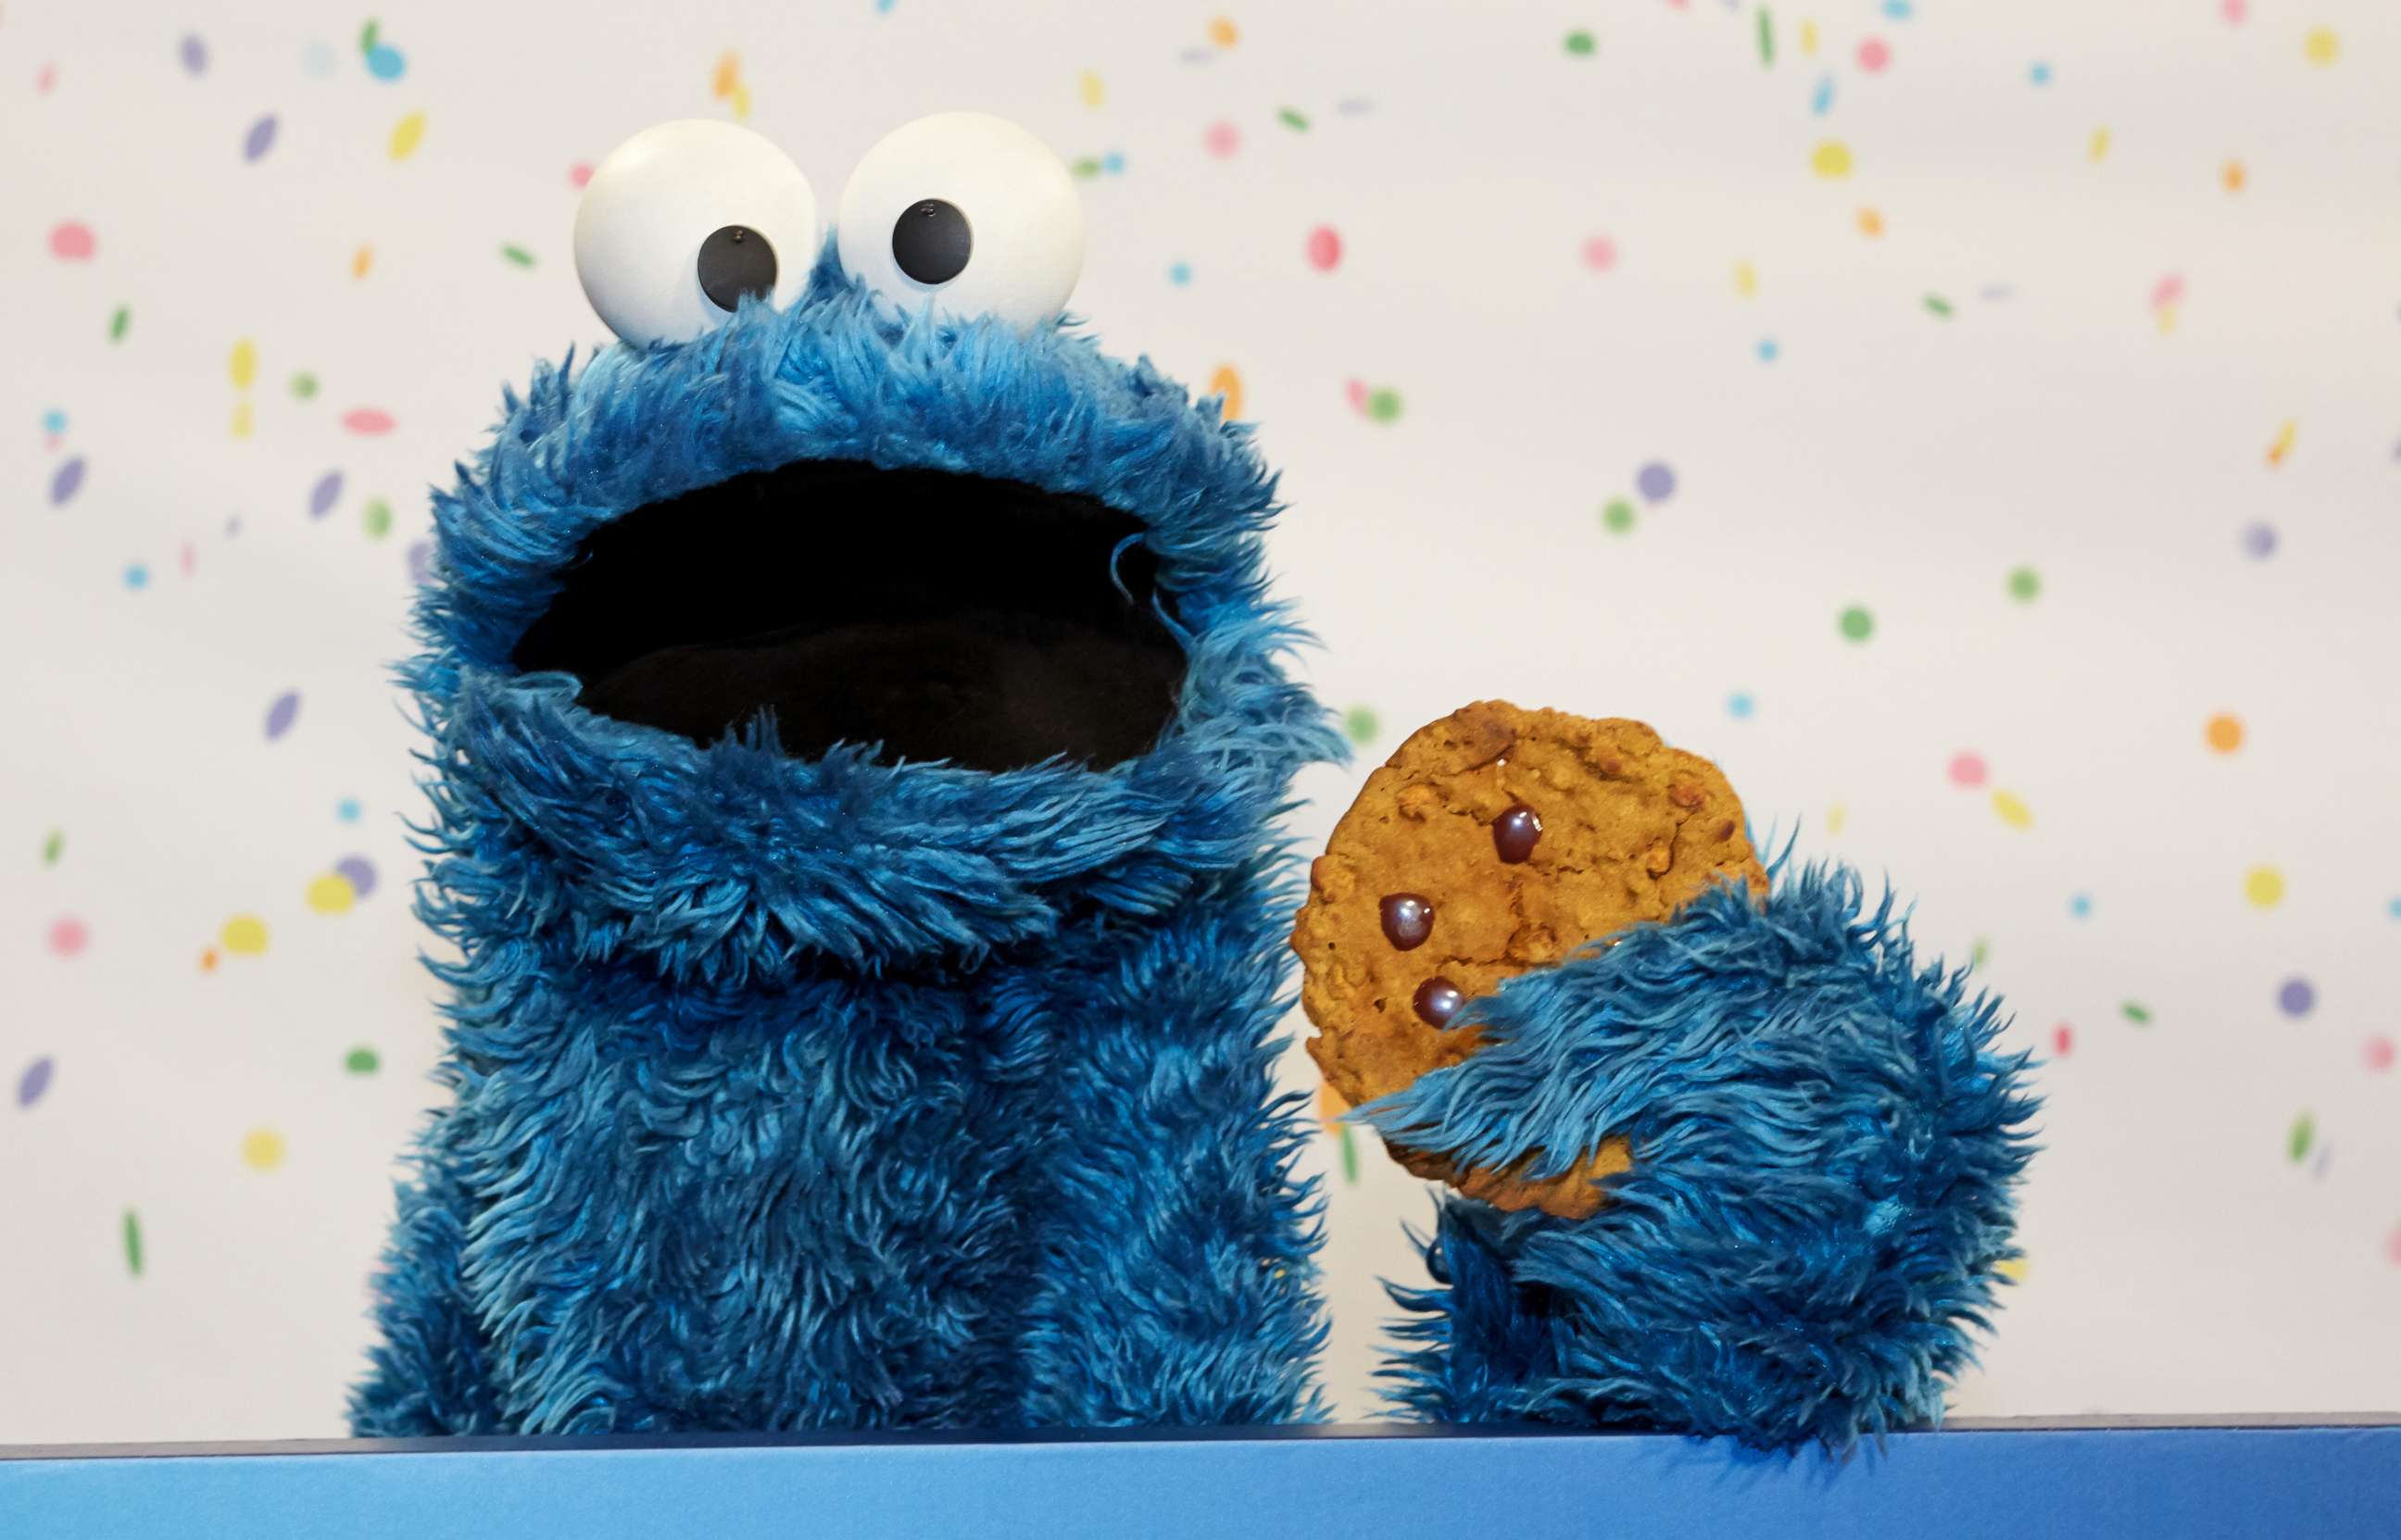 Waze adds Cookie Monster voice navigation to celebrate the